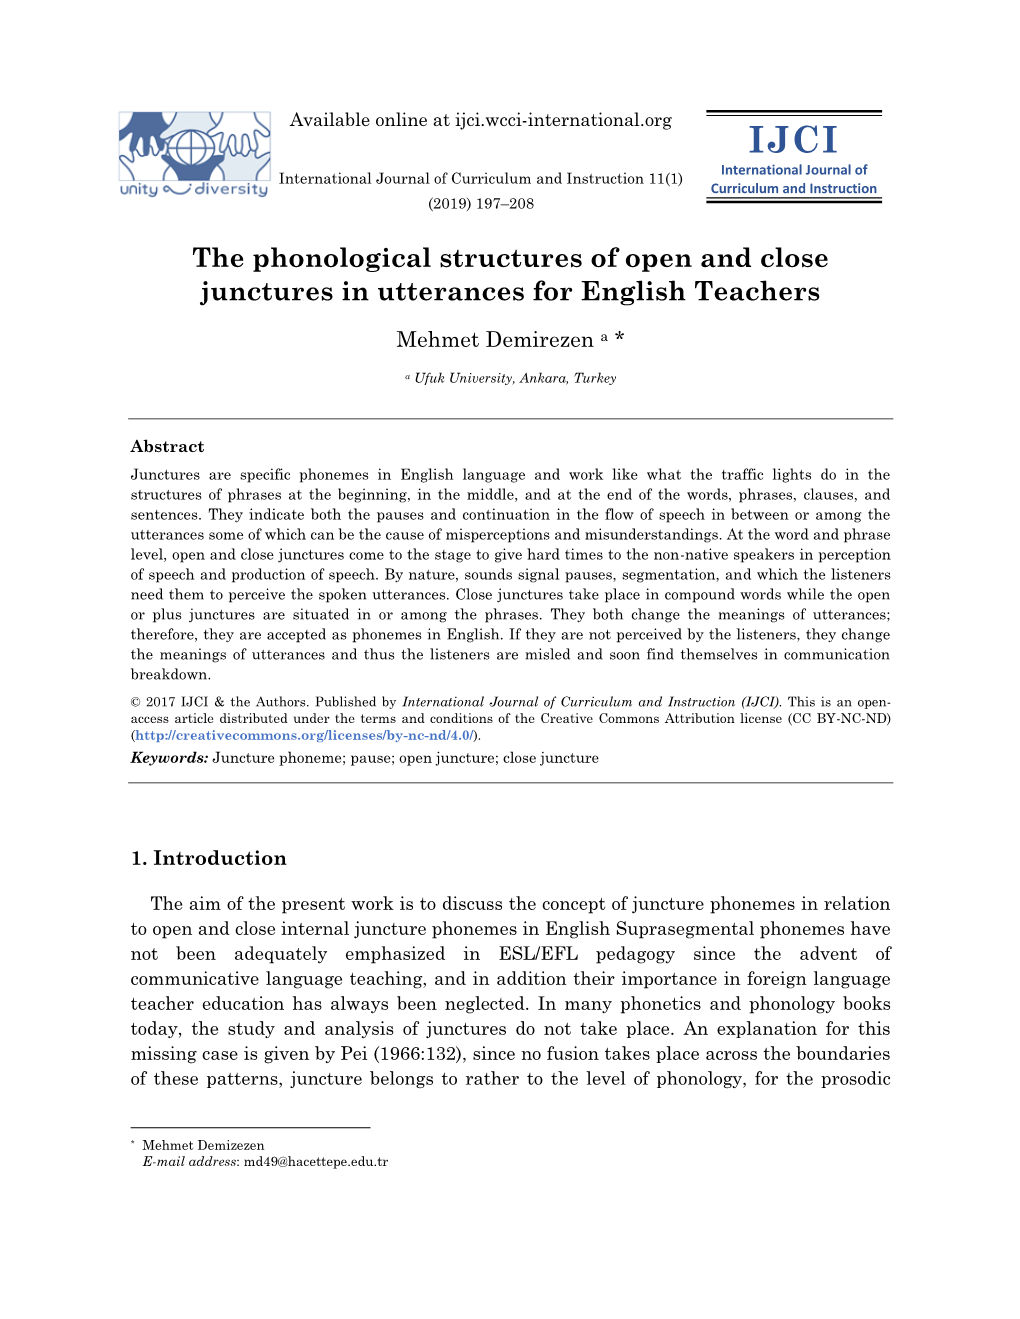 The Phonological Structures of Open and Close Junctures in Utterances for English Teachers